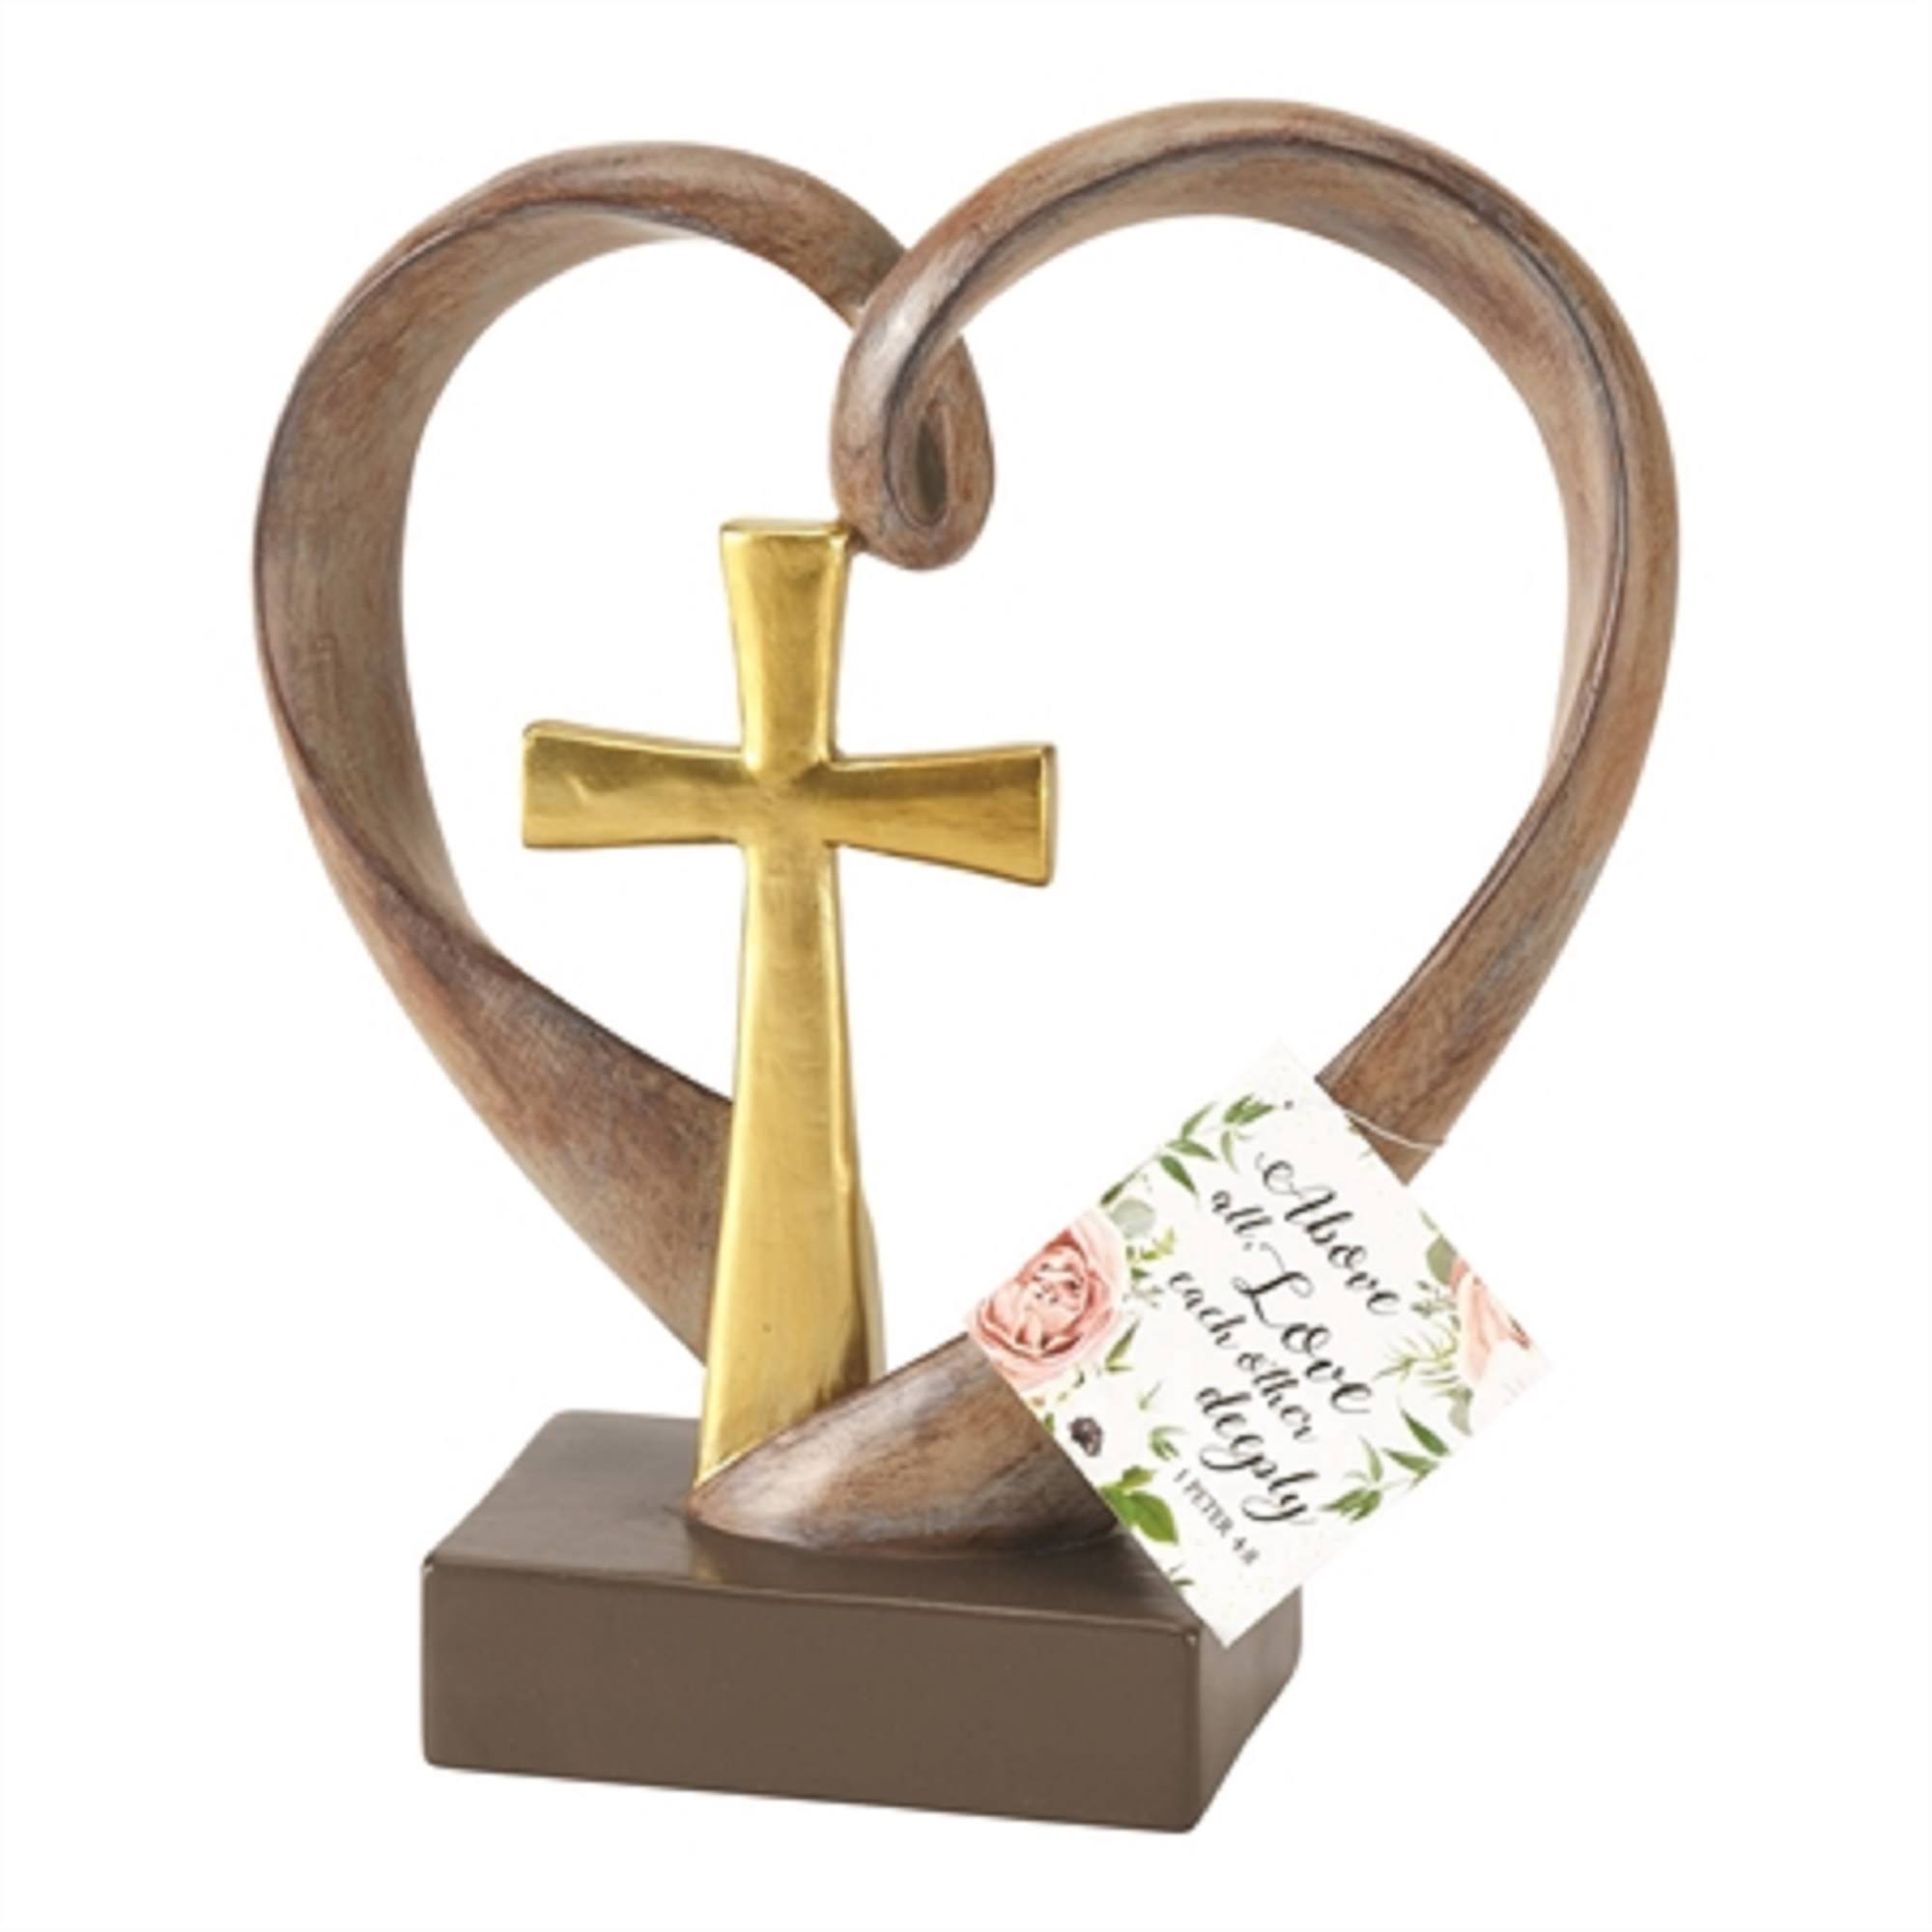 6" Natural Brown and Gold Heart Shaped Cross Sculptured Tabletop Decor